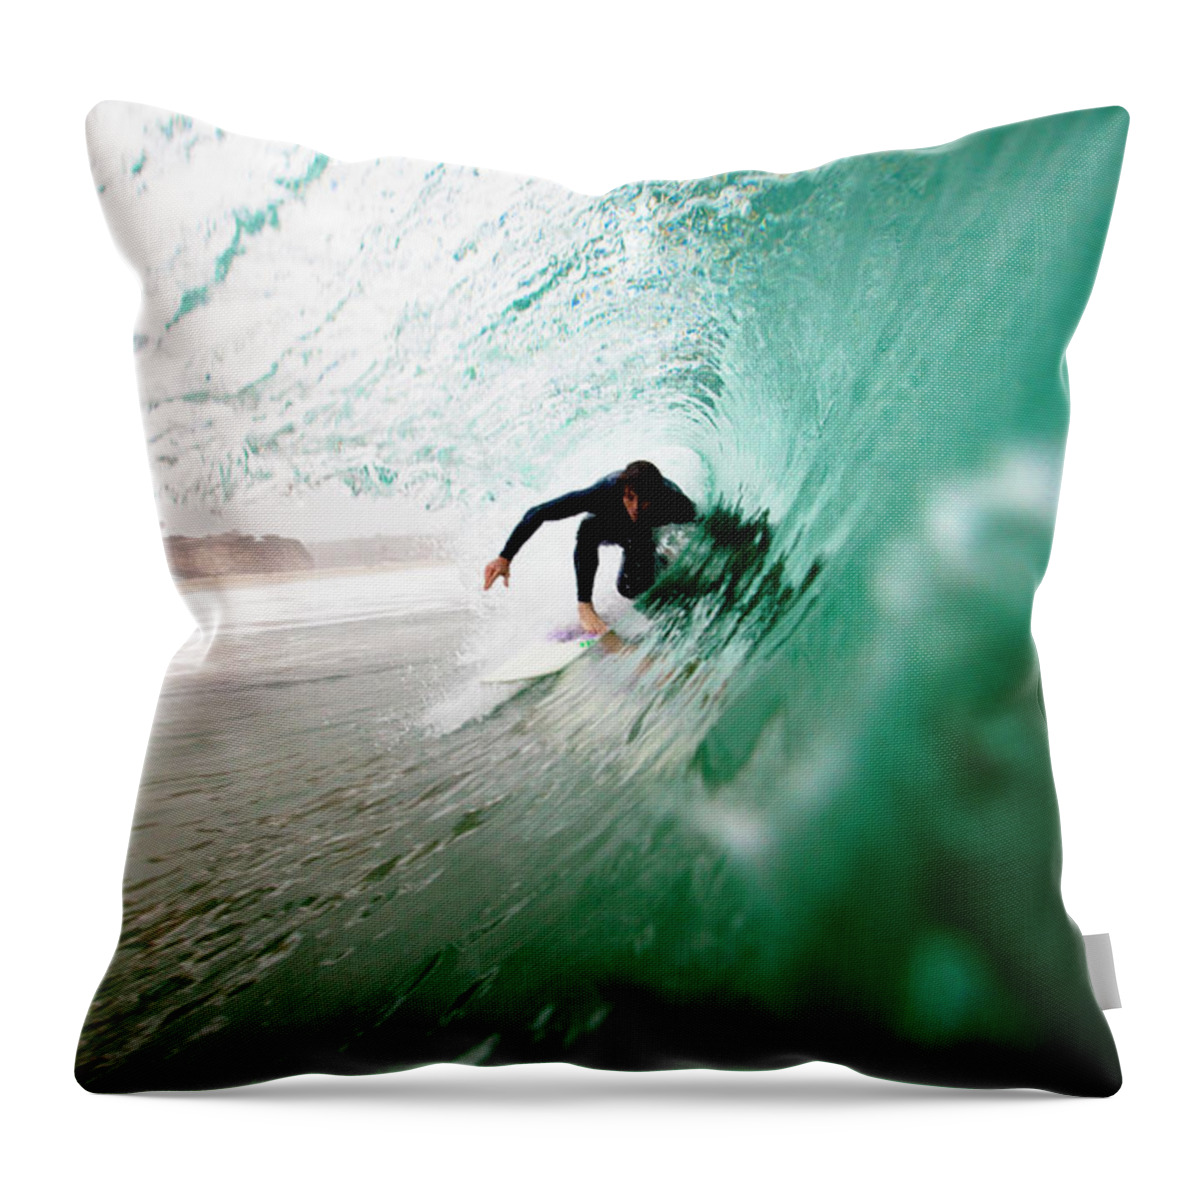 Young Men Throw Pillow featuring the photograph A Male Surfer Pulls Into A Barrel While by Kyle Sparks